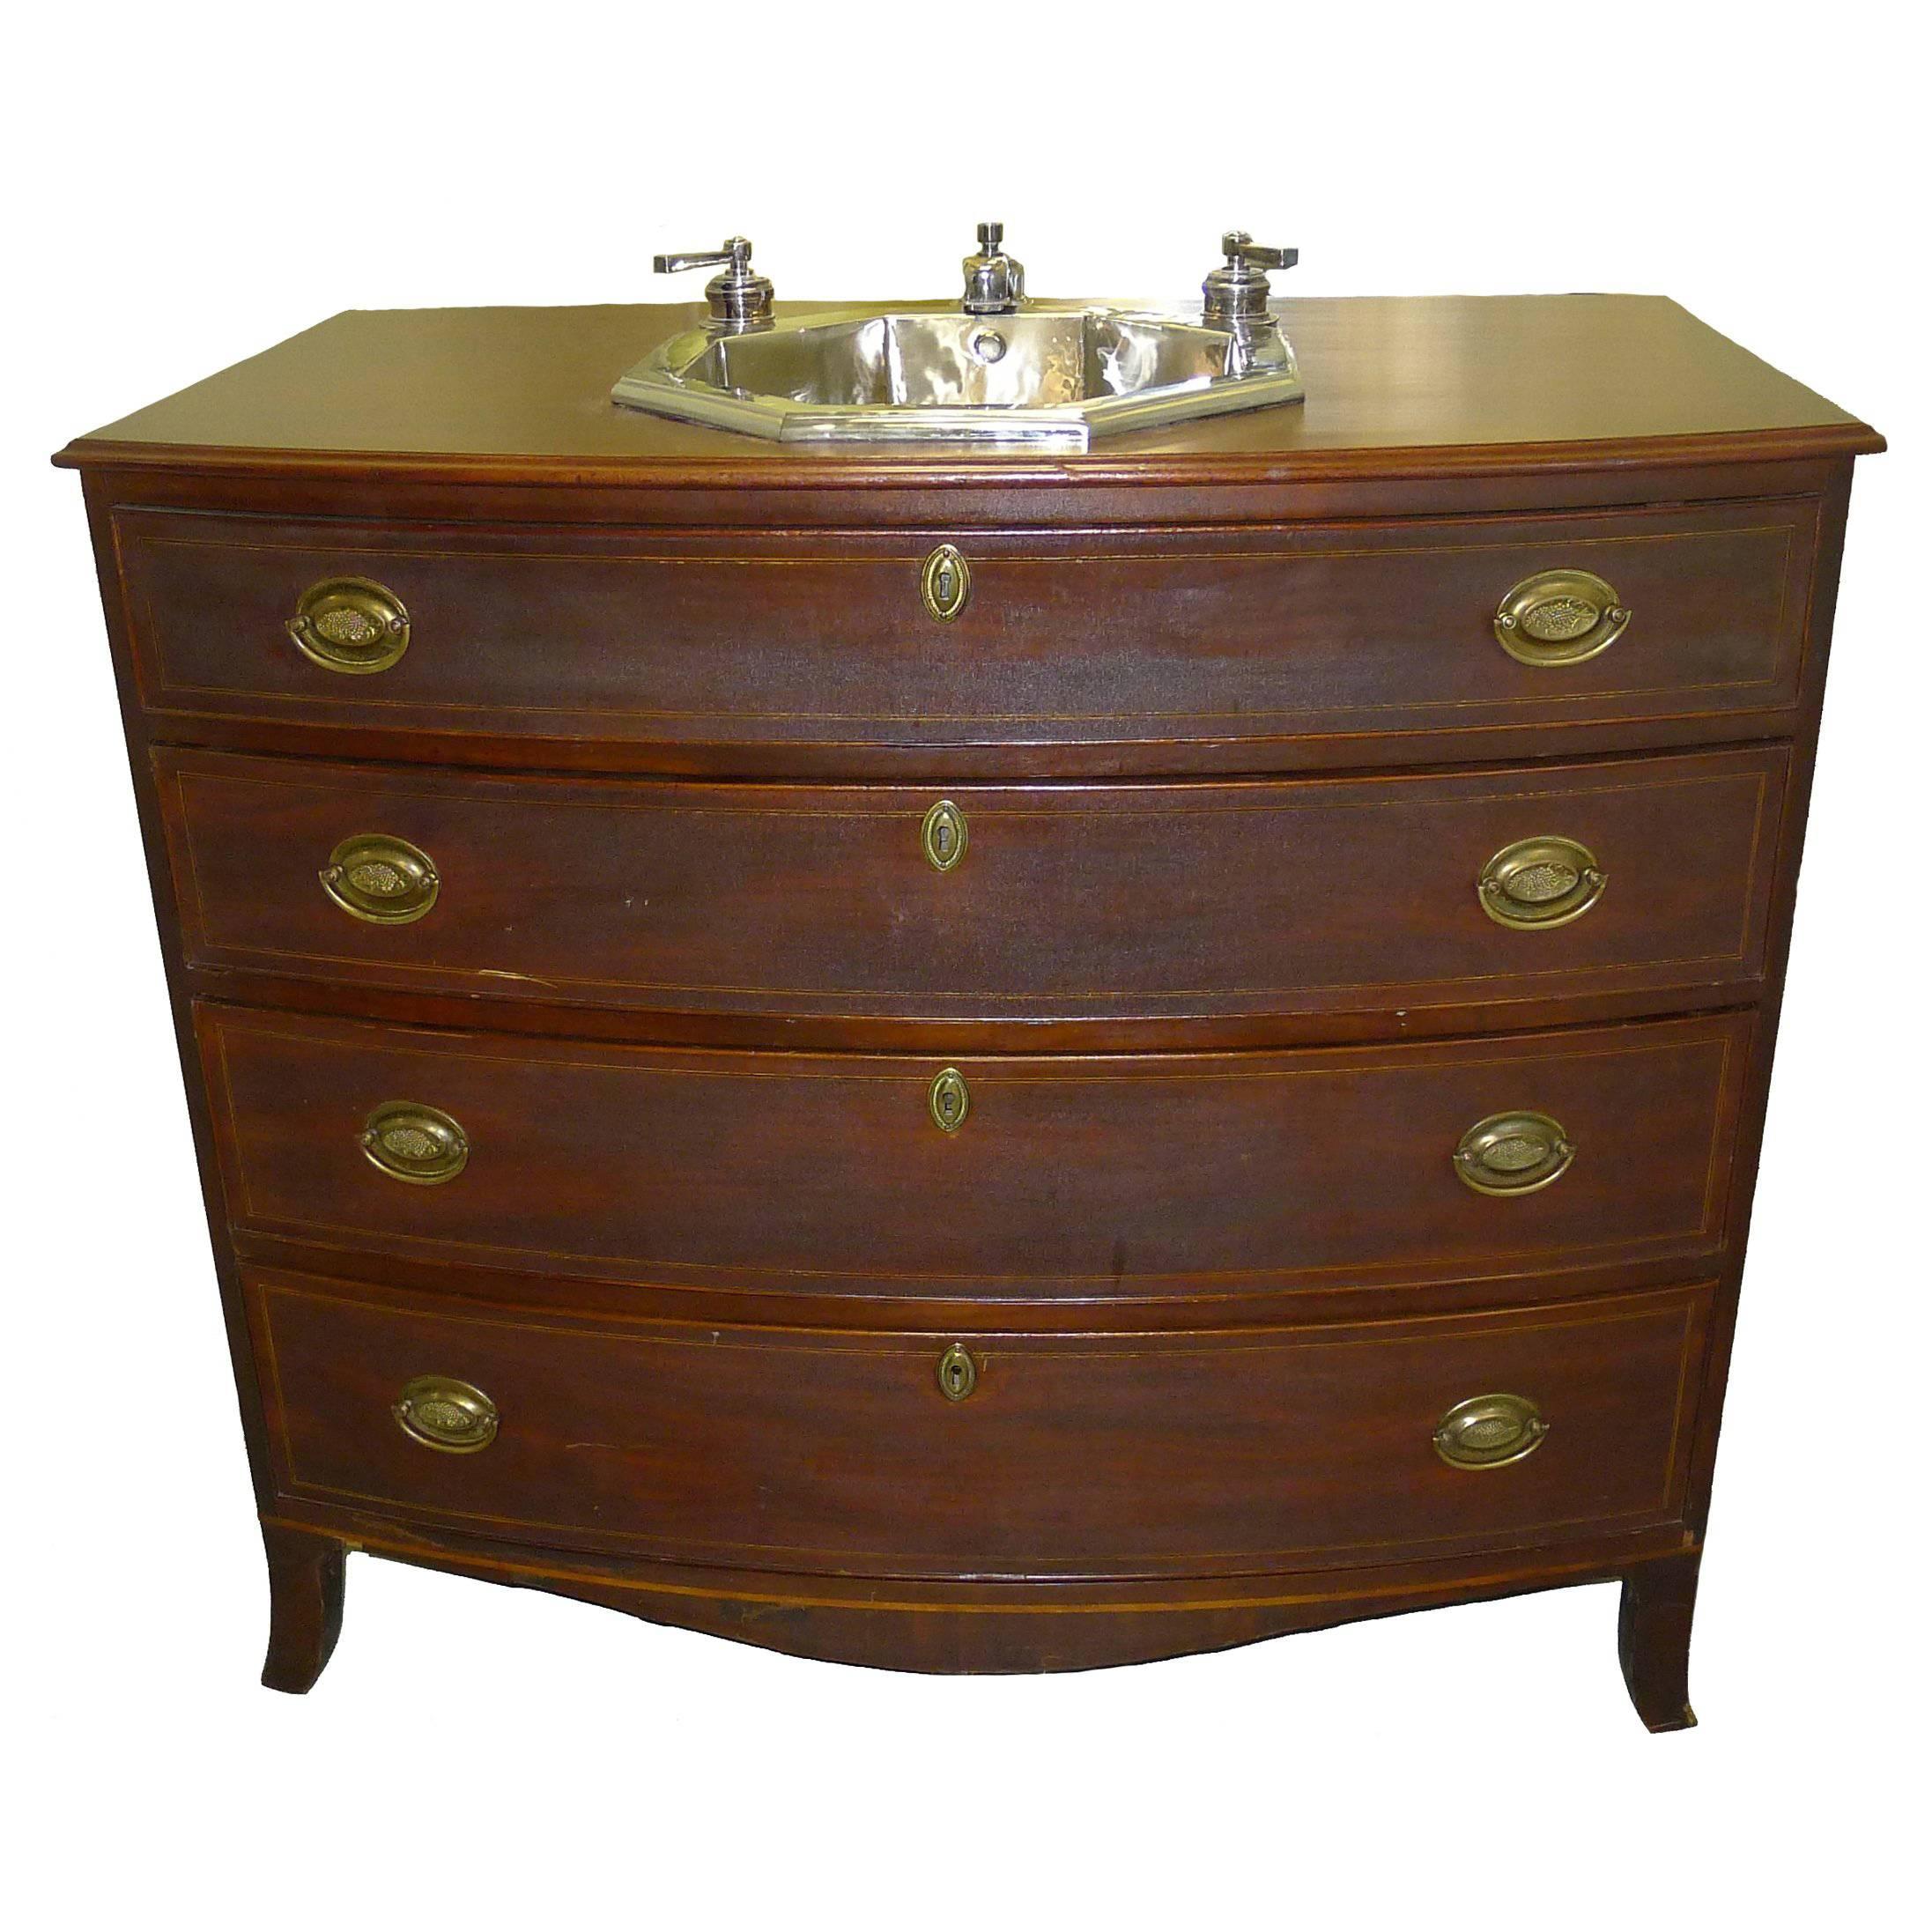 1810 American Federal Bow Front Chest Sink with Waterworks Nickel Fittings